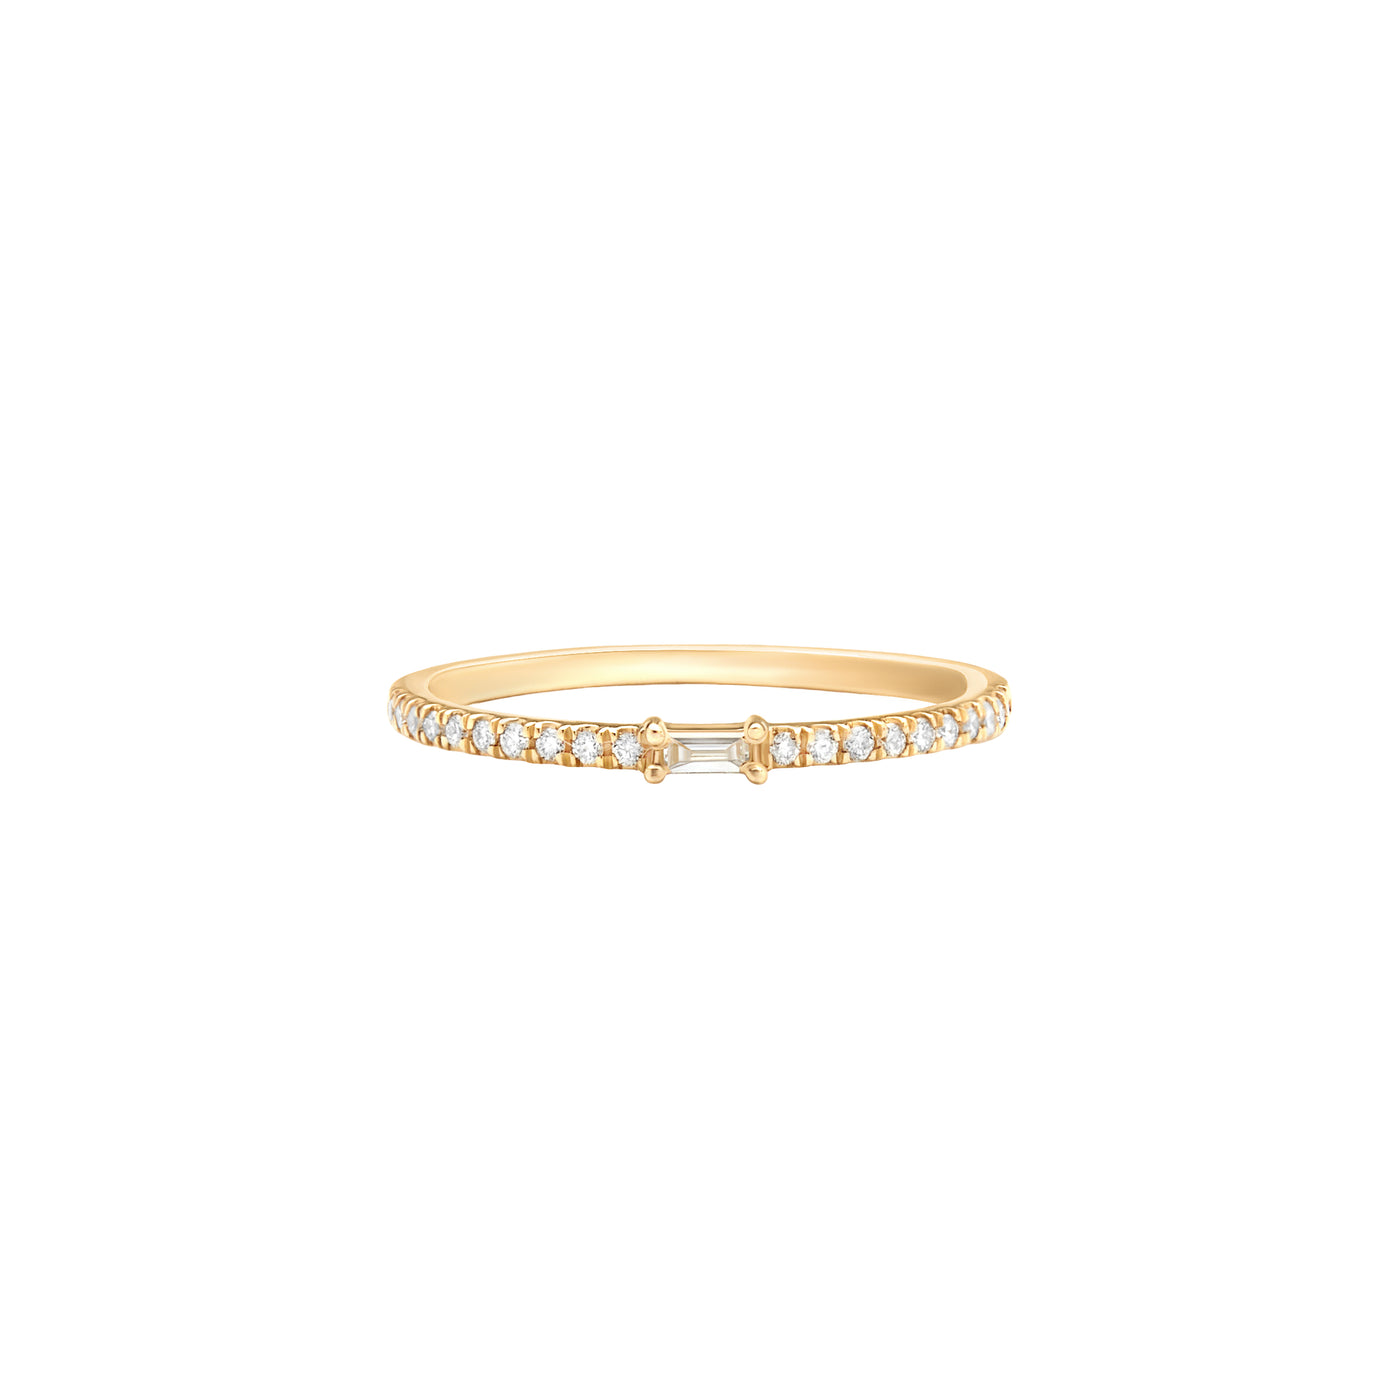 14 Karat Yellow Gold Ring With Baguette Center Stone and One Row of Diamonds Against White Background